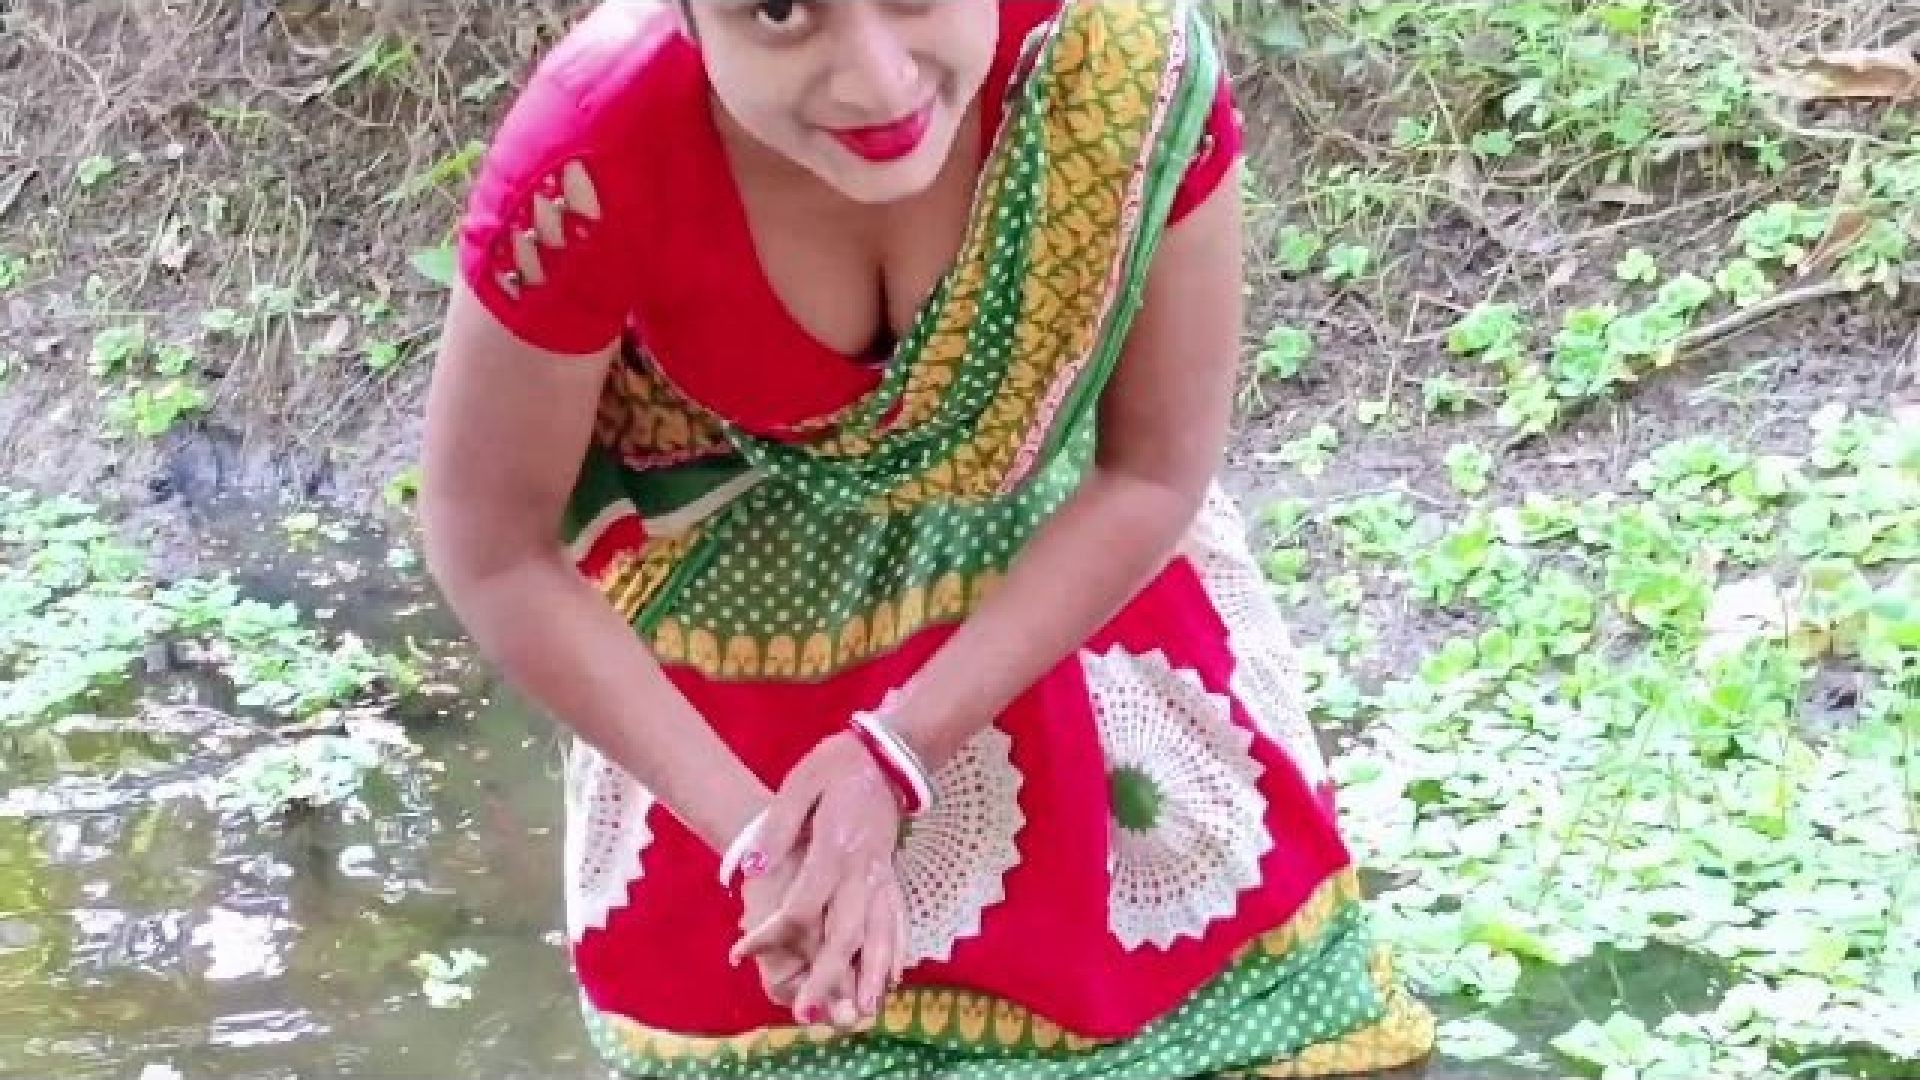 Sumona super ht navel show-Our beautiful village and village